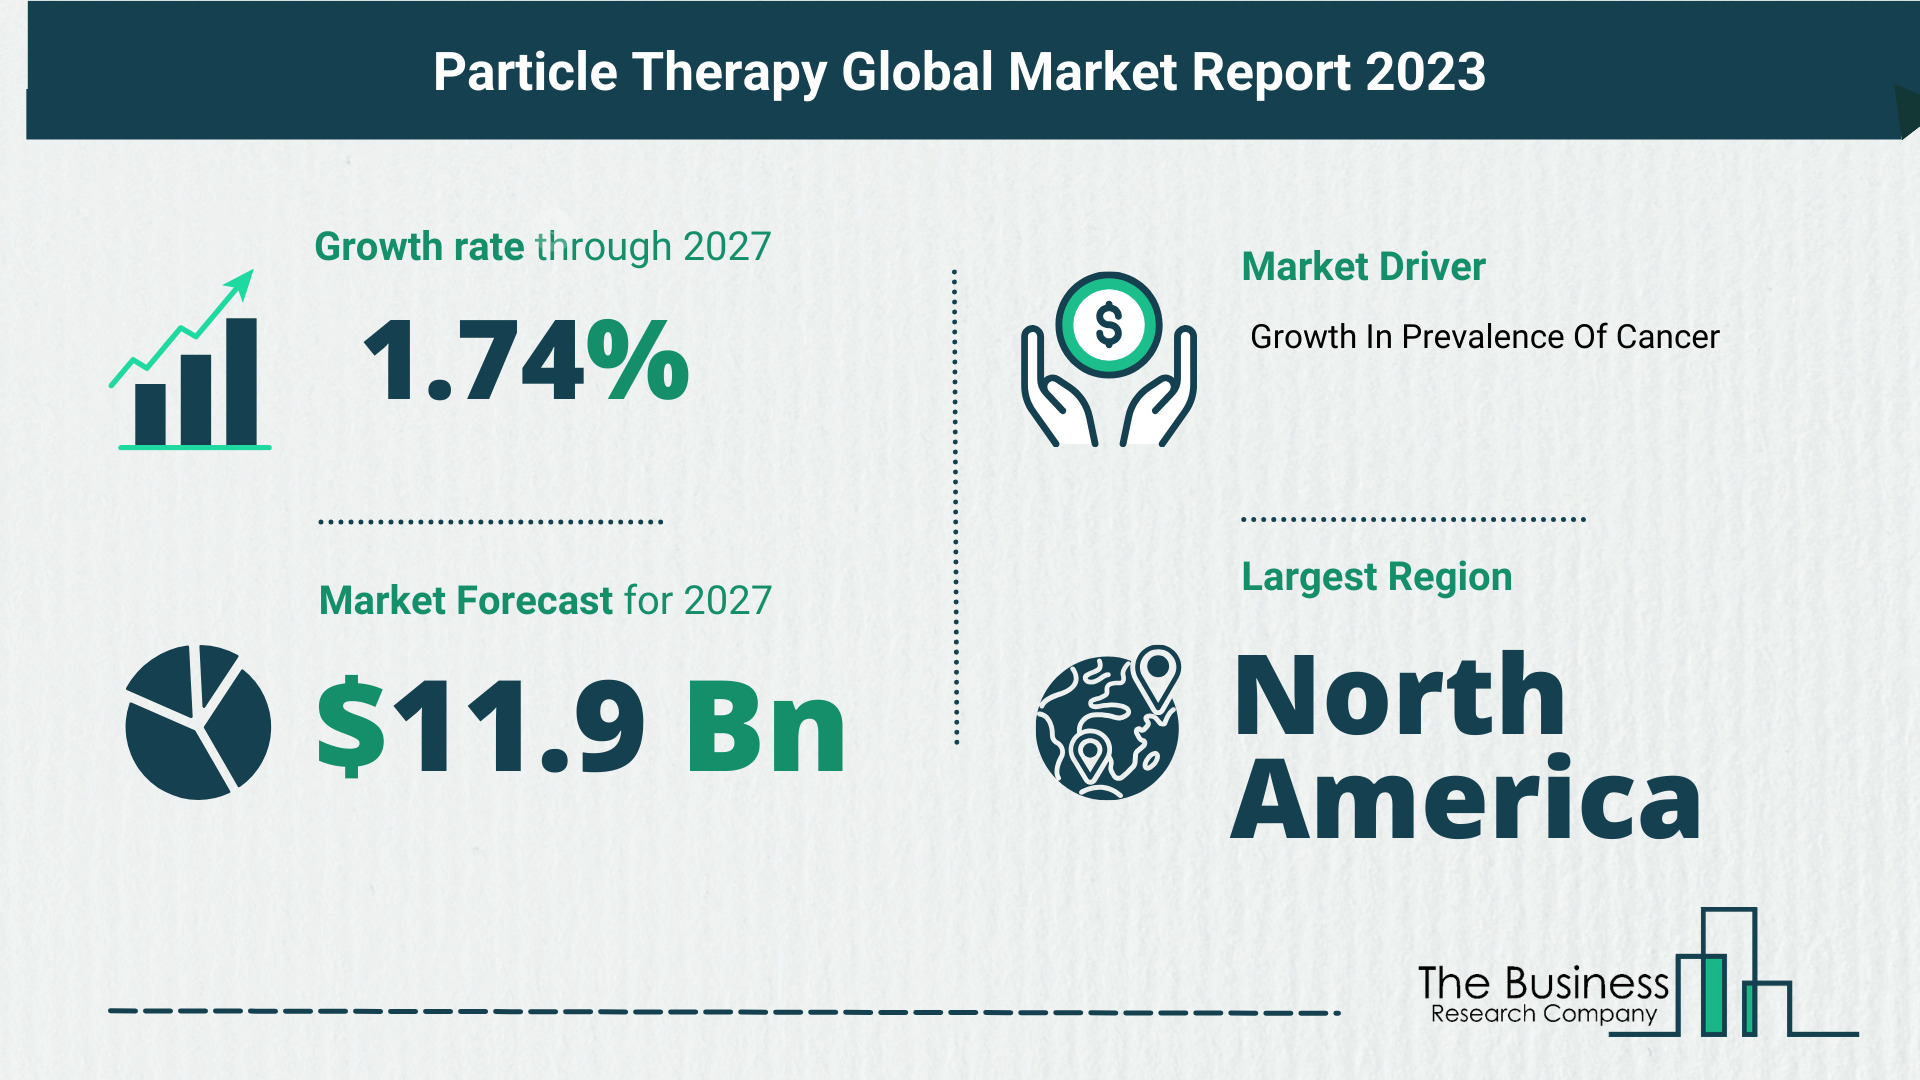 Global Particle Therapy Market